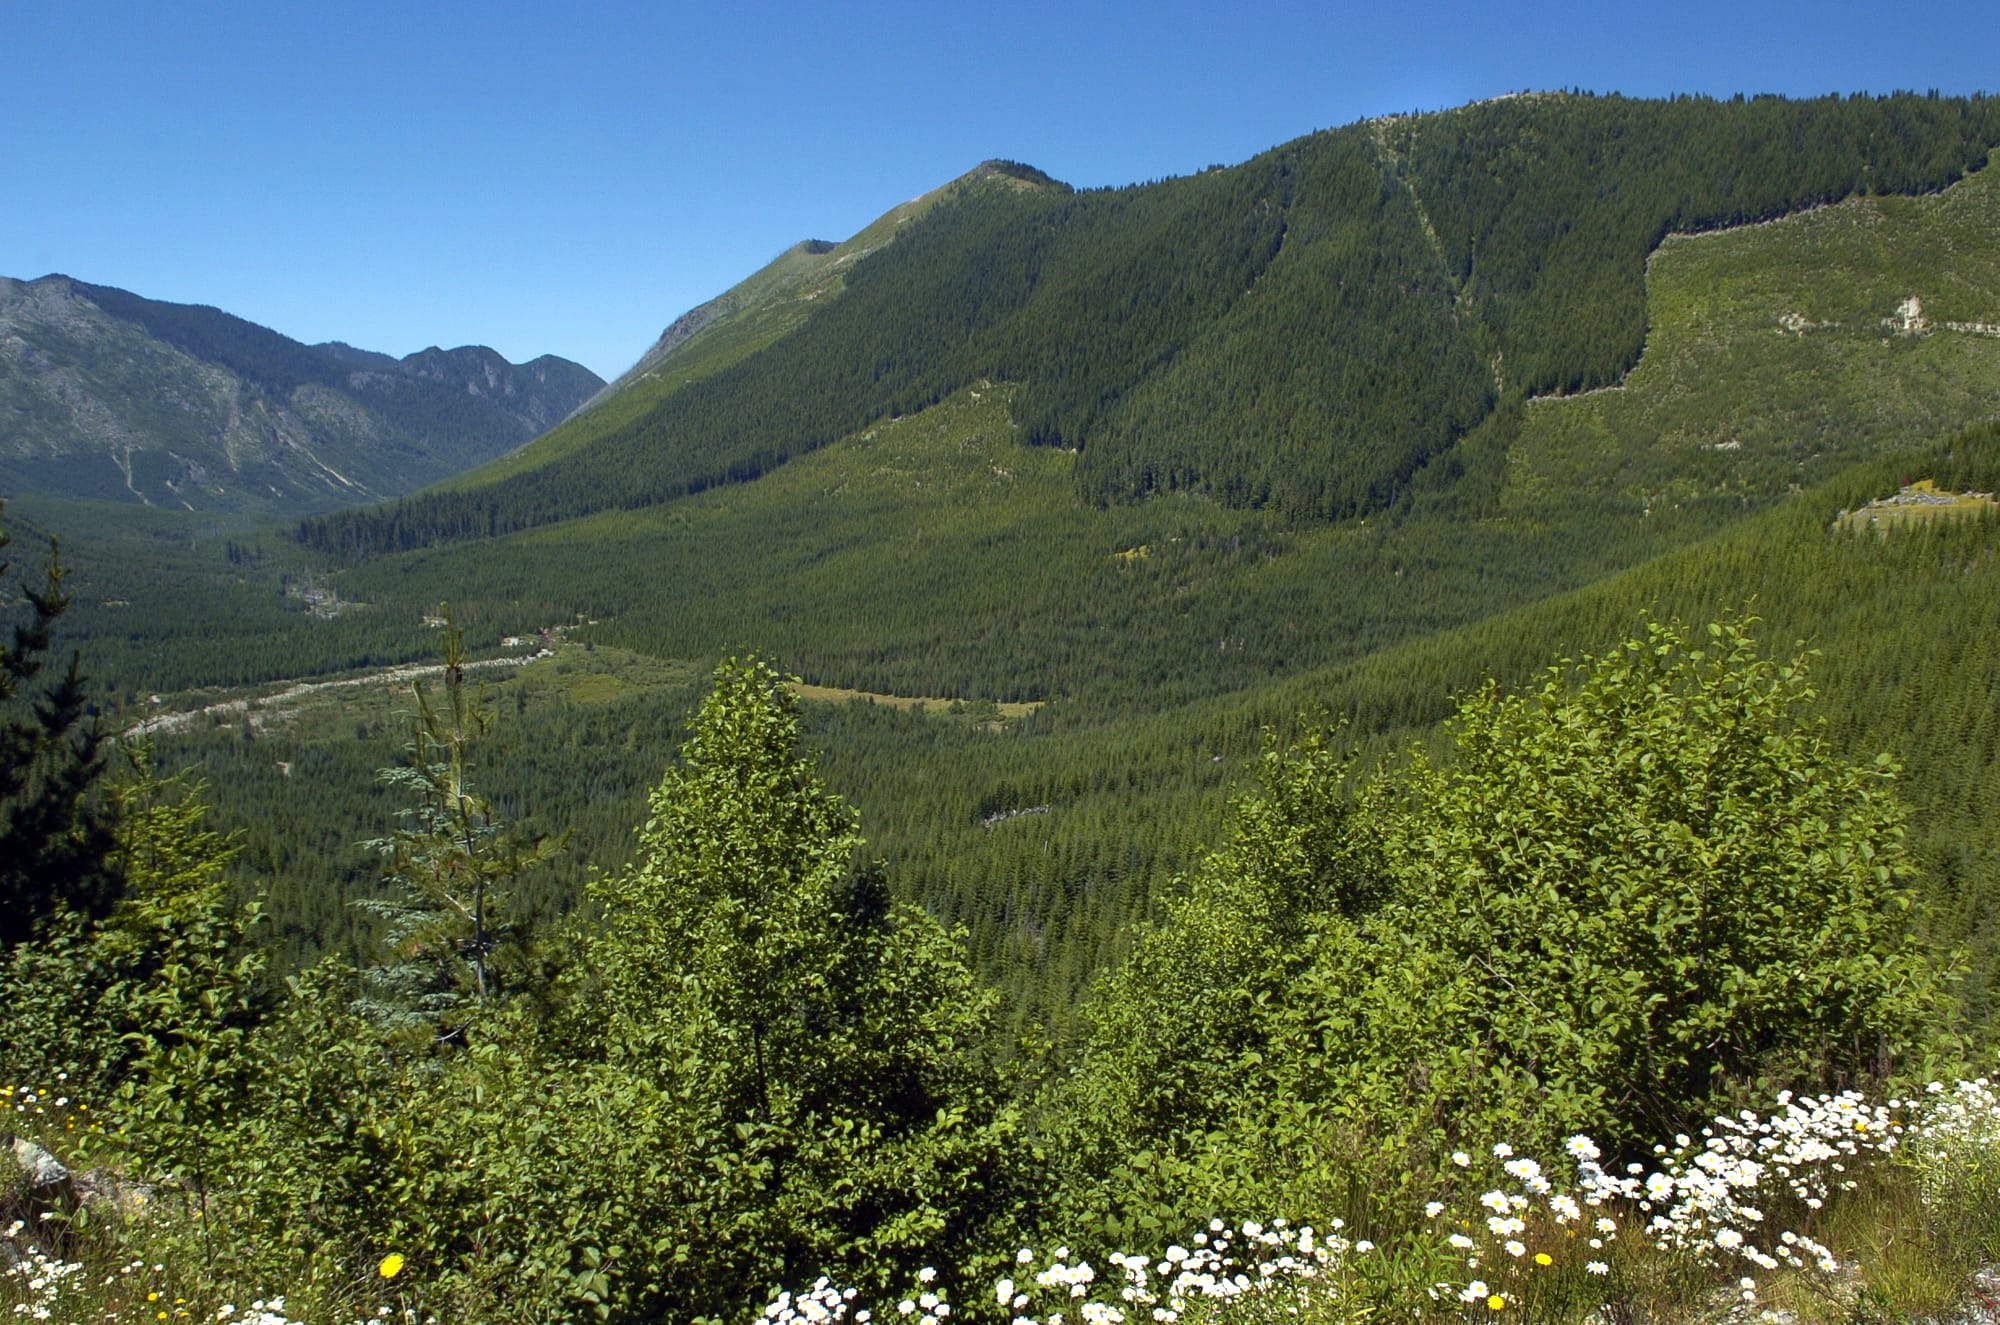 This 2005 photo looks west from Forest Road 26 northeast of Spirit Lake toward Goat Mountain, the area where Ascot USA Inc. wants to drill exploratory holes to study the possibility of mining for minerals such as copper, gold and molybdenum. The U.S. Forest Service has given its consent to allow the exploratory mining near Mount St. Helens.